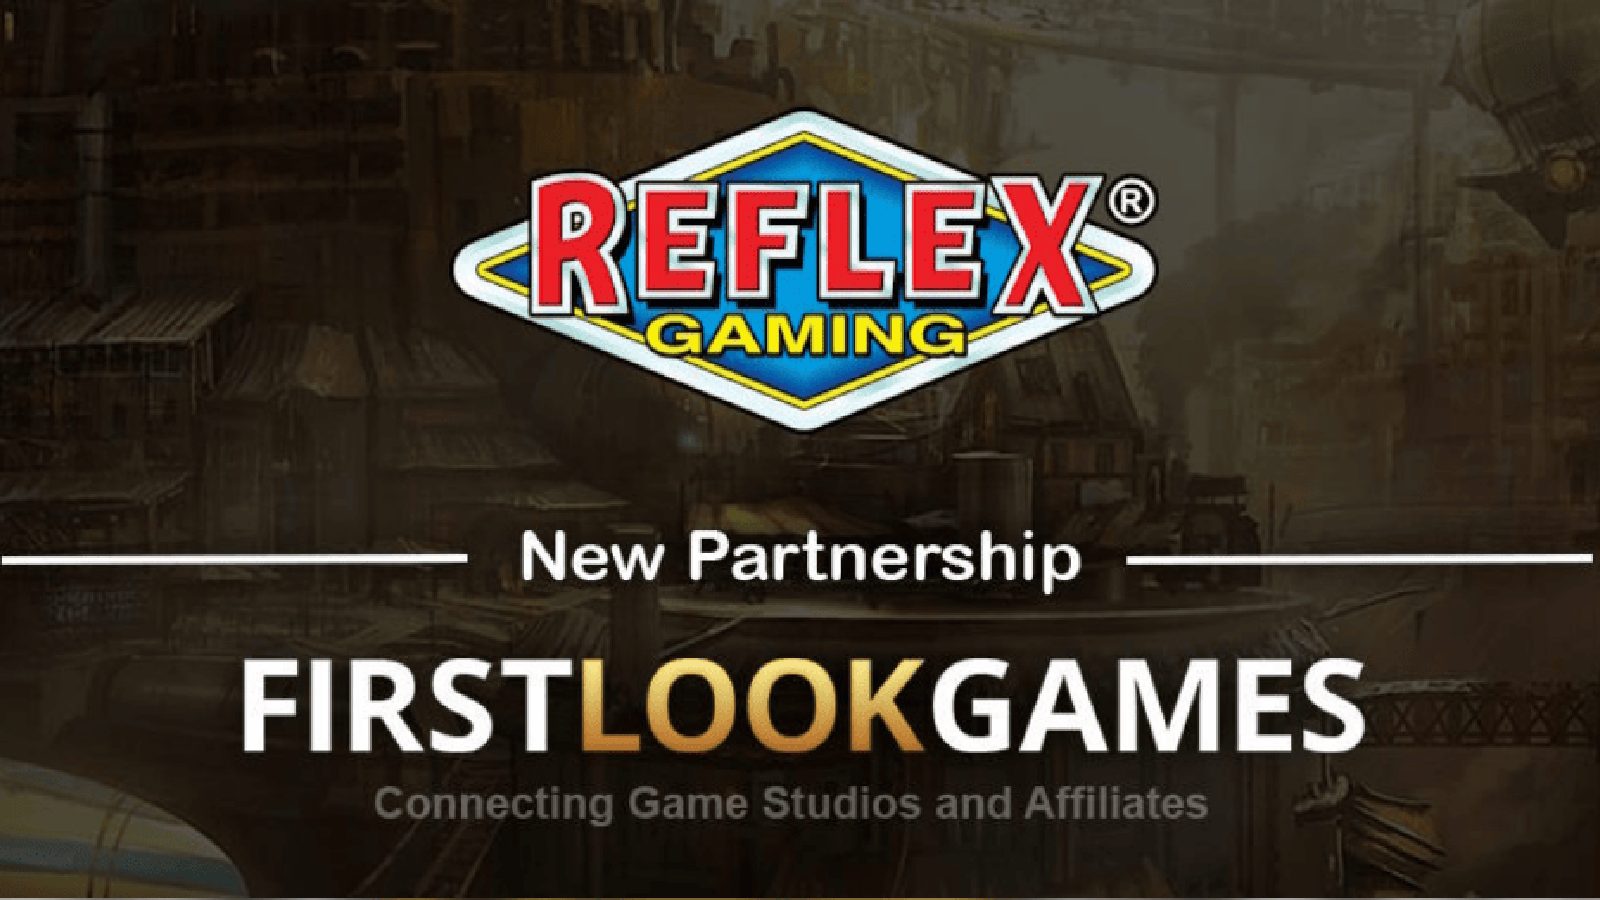 Reflex Gaming joins First Look Games